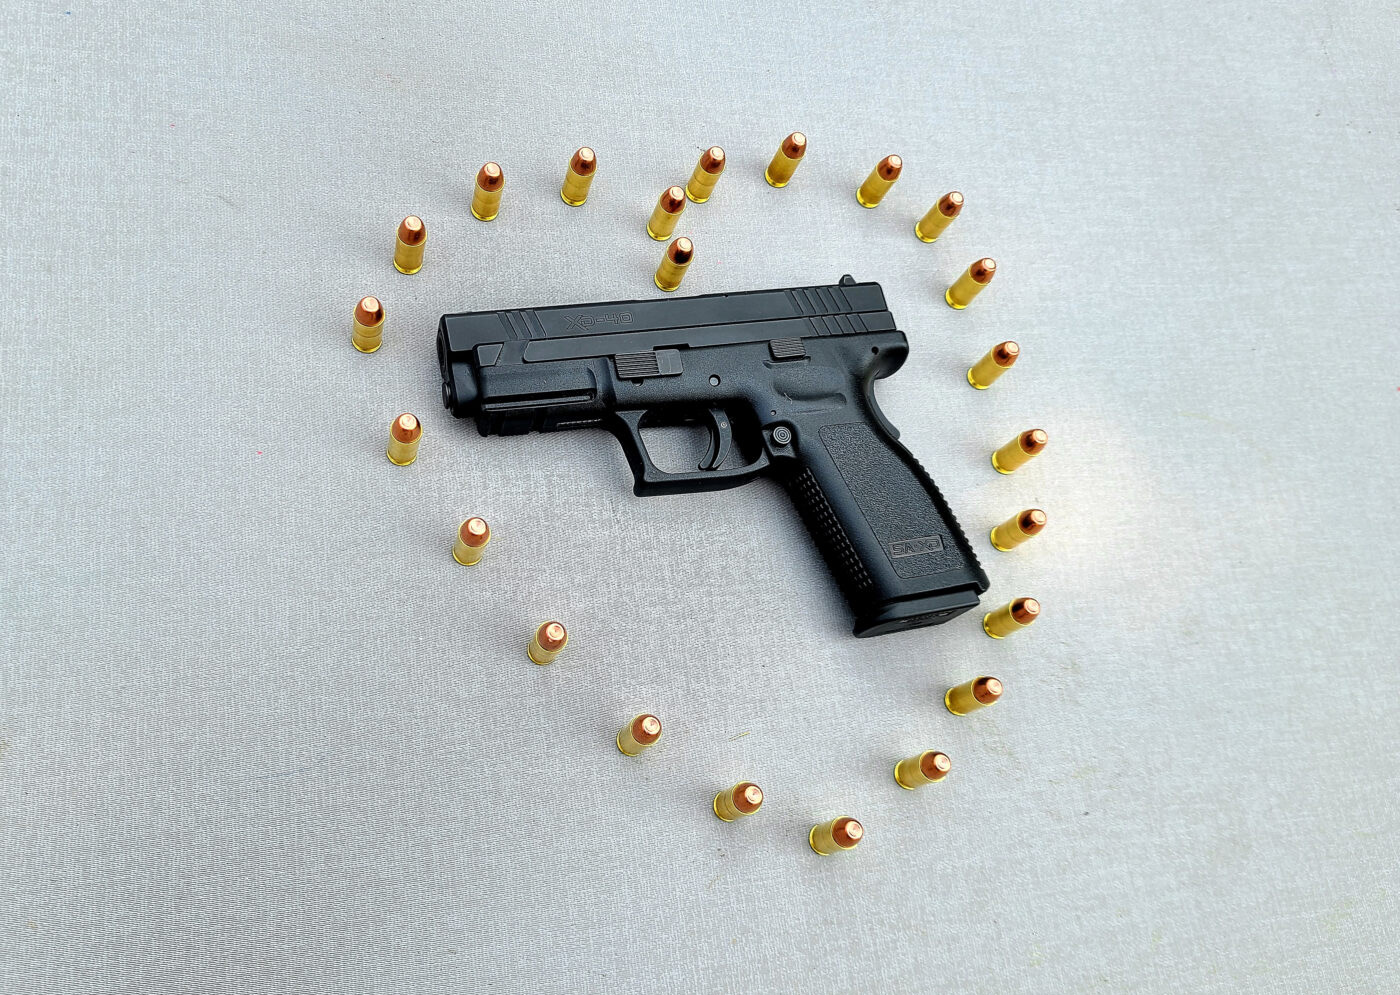 Ammo forming a heart shape around an XD pistol